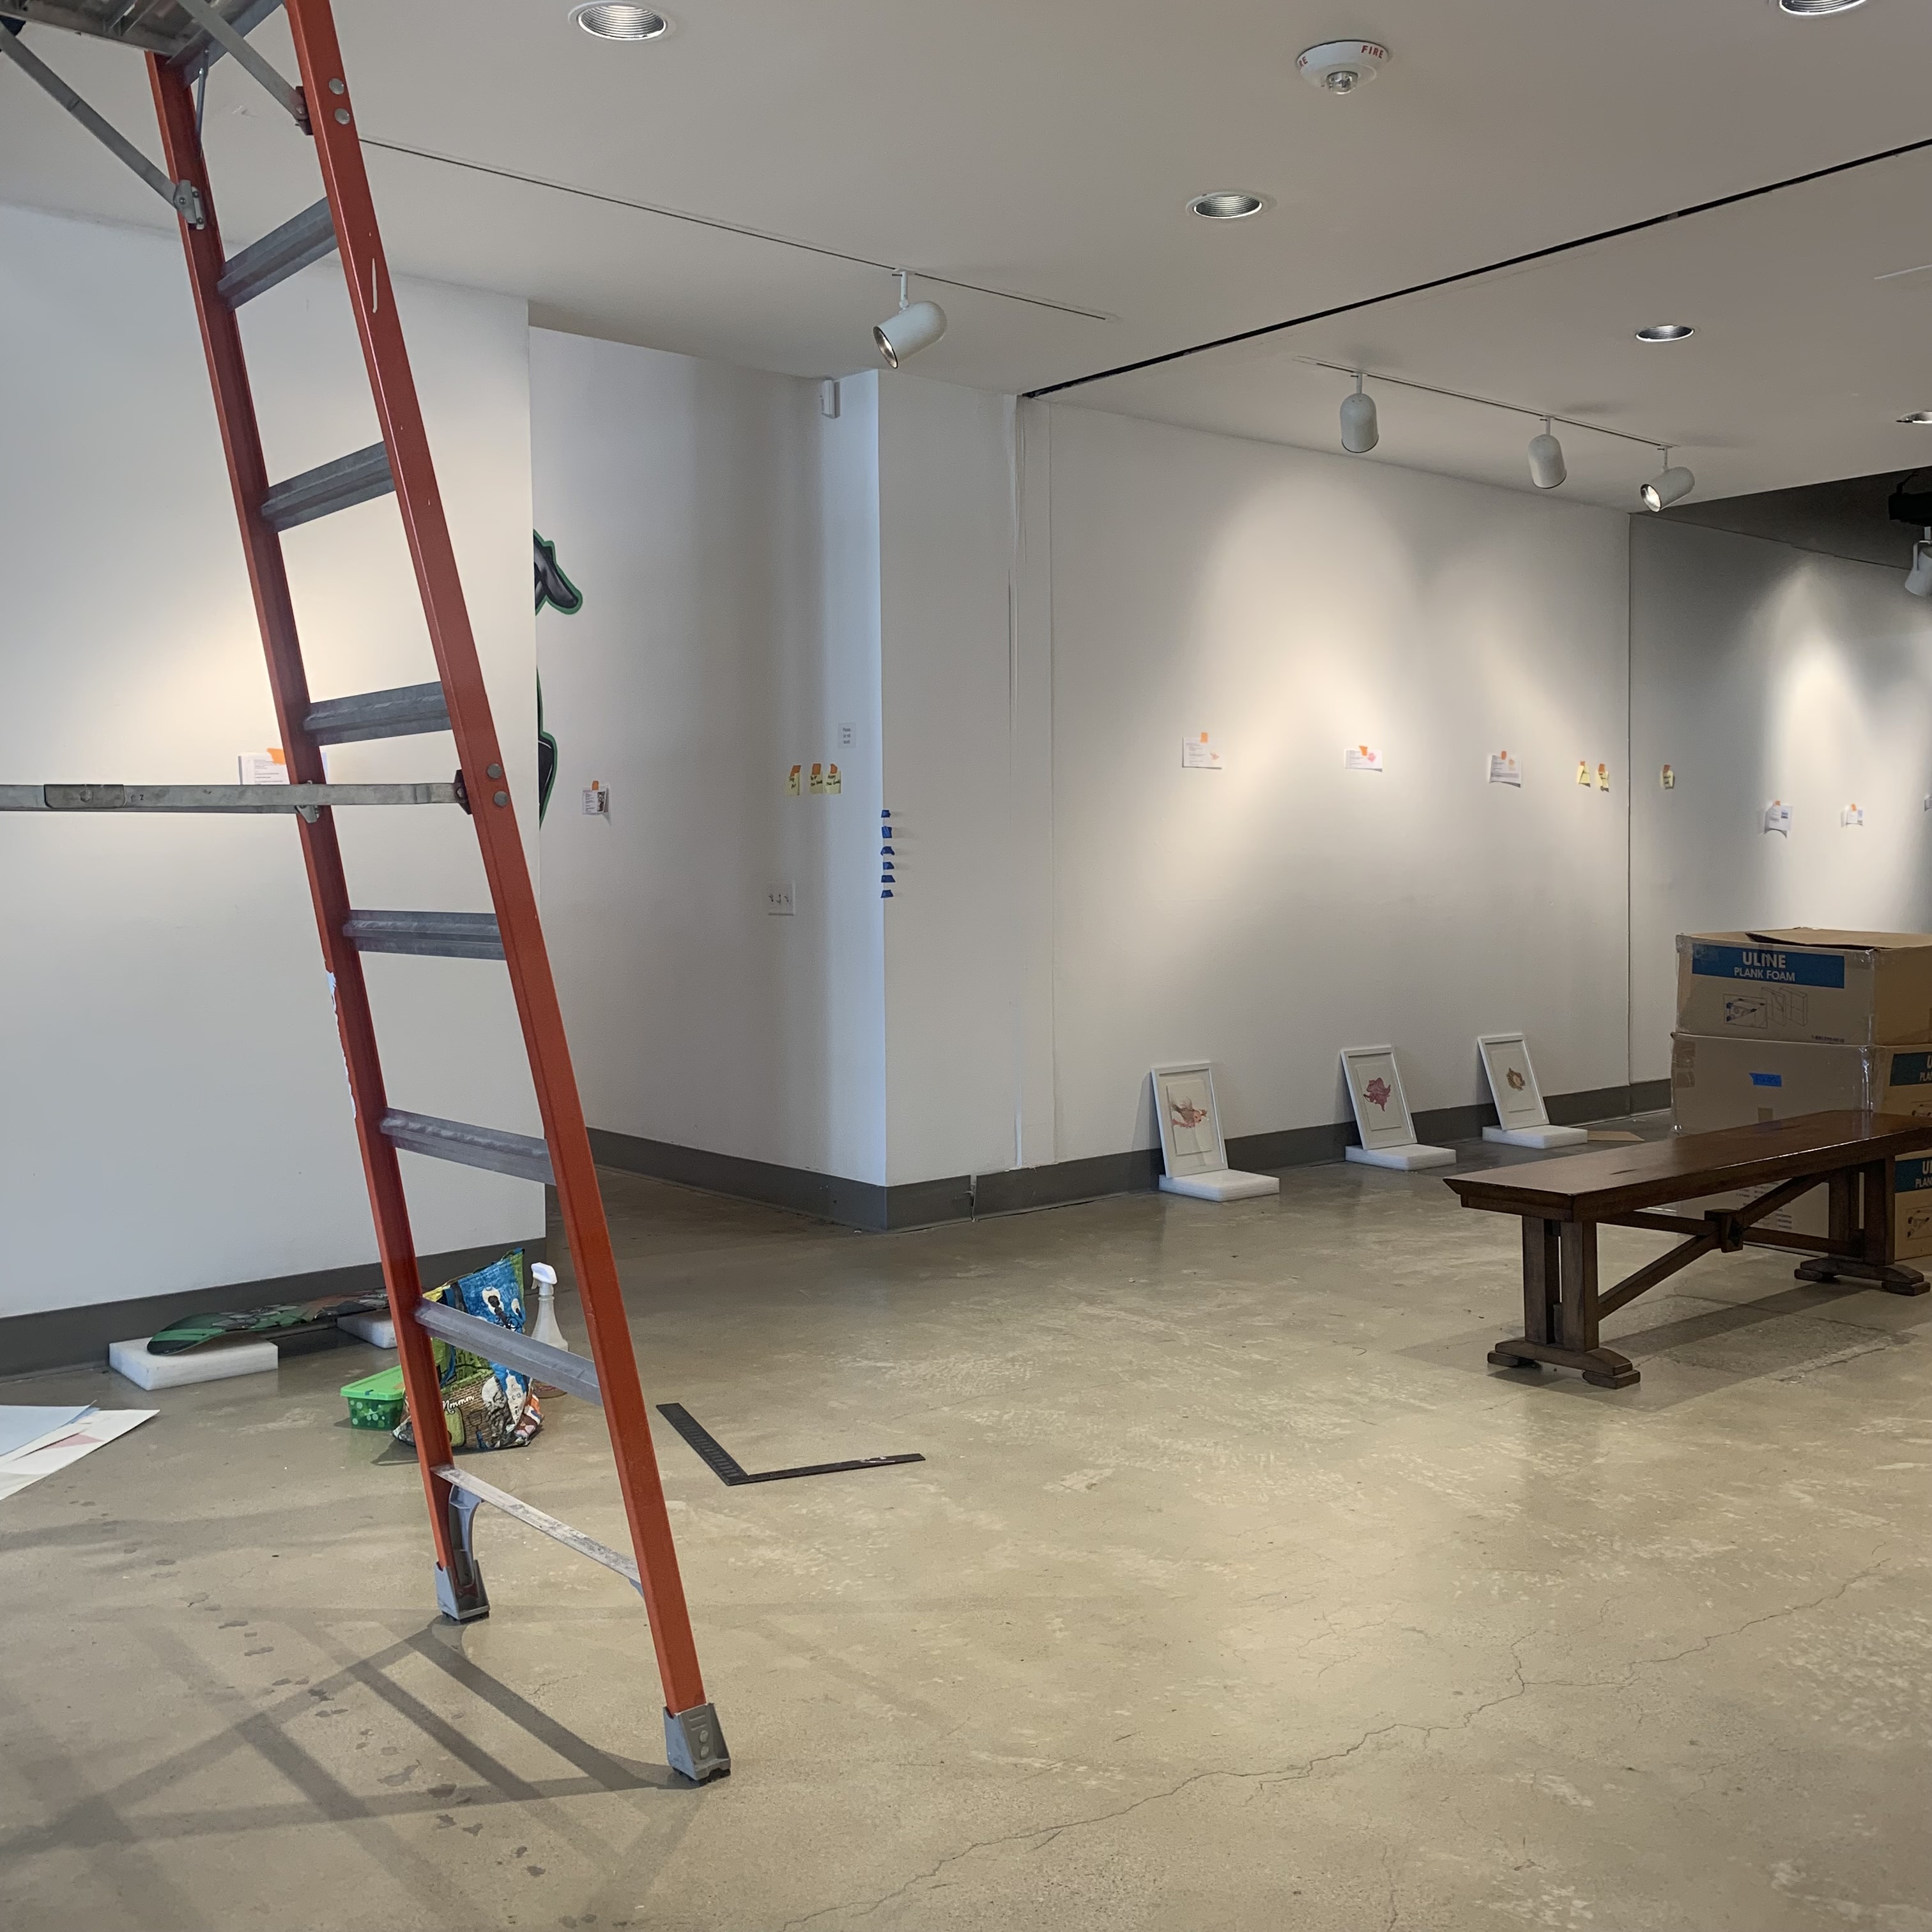 Image of Kellogg art gallery preparing for faculty show